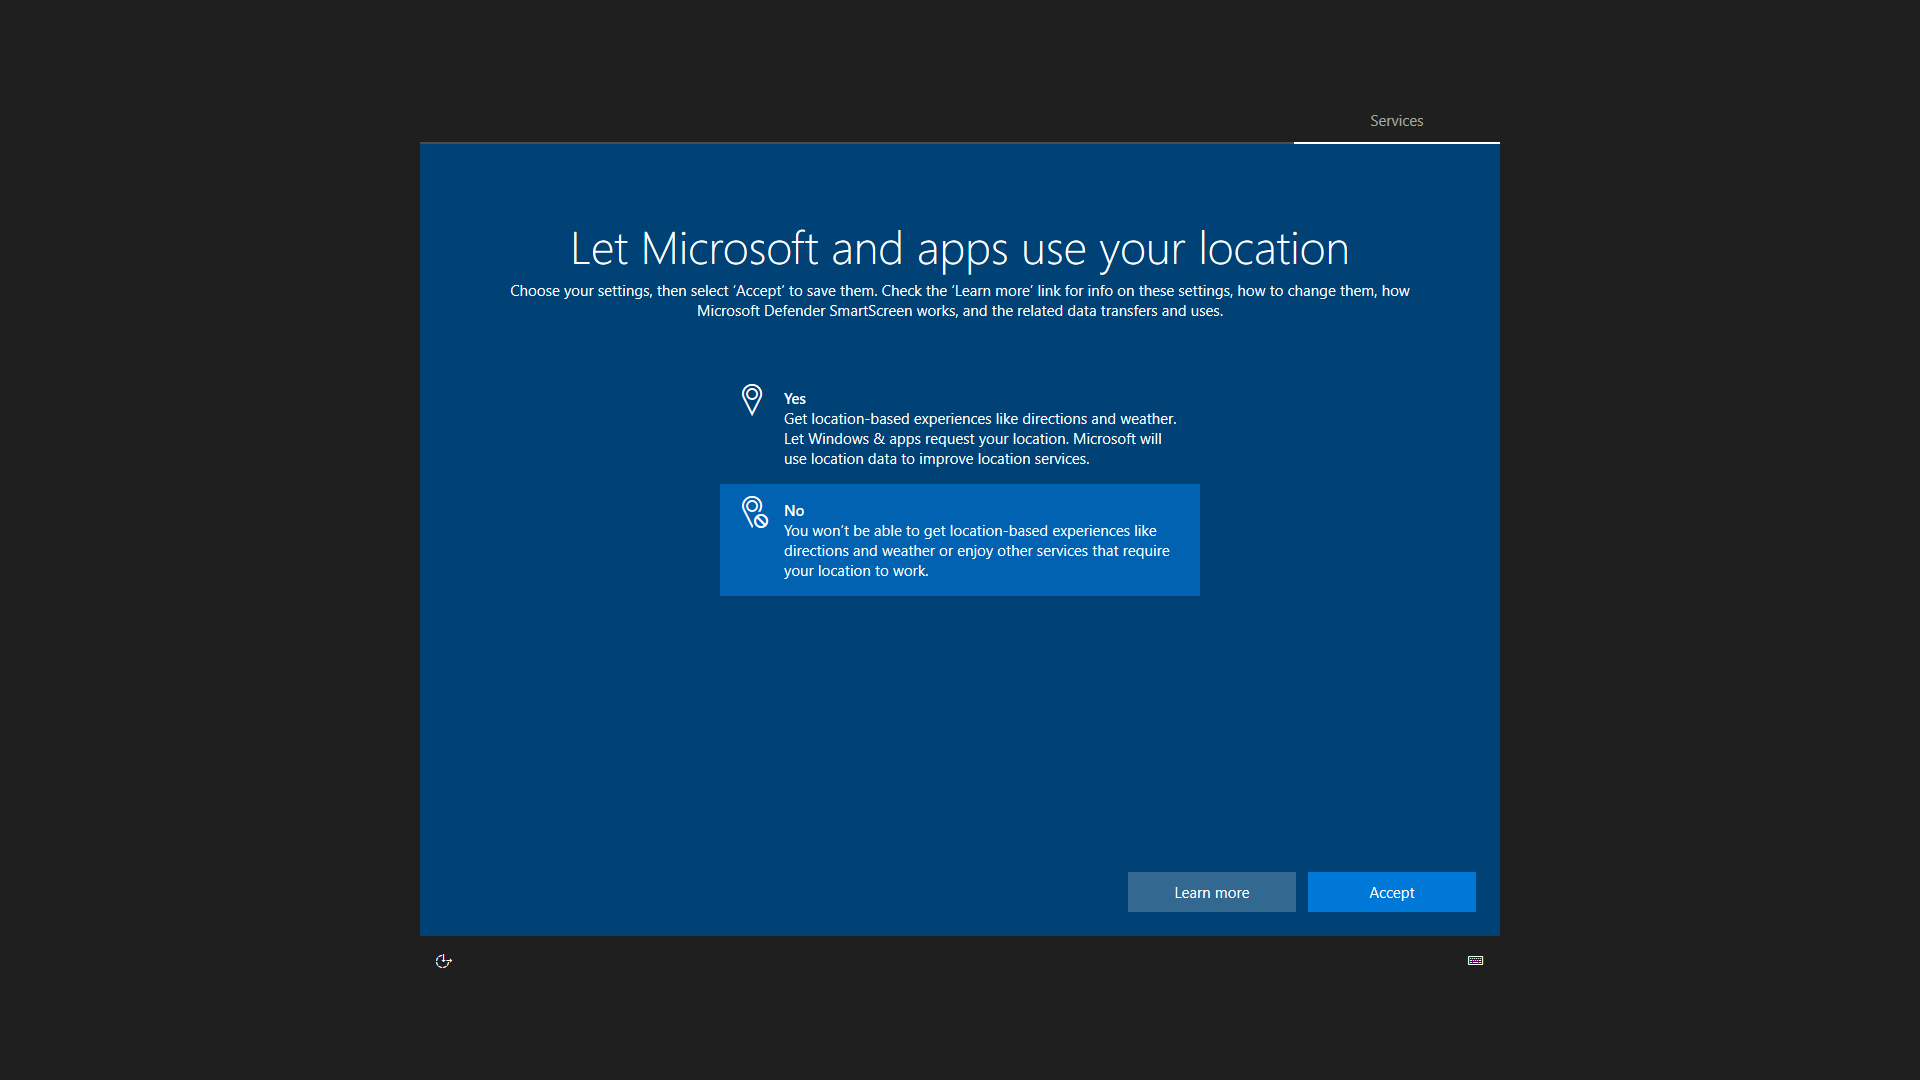 Let Microsoft and apps use your location question screen